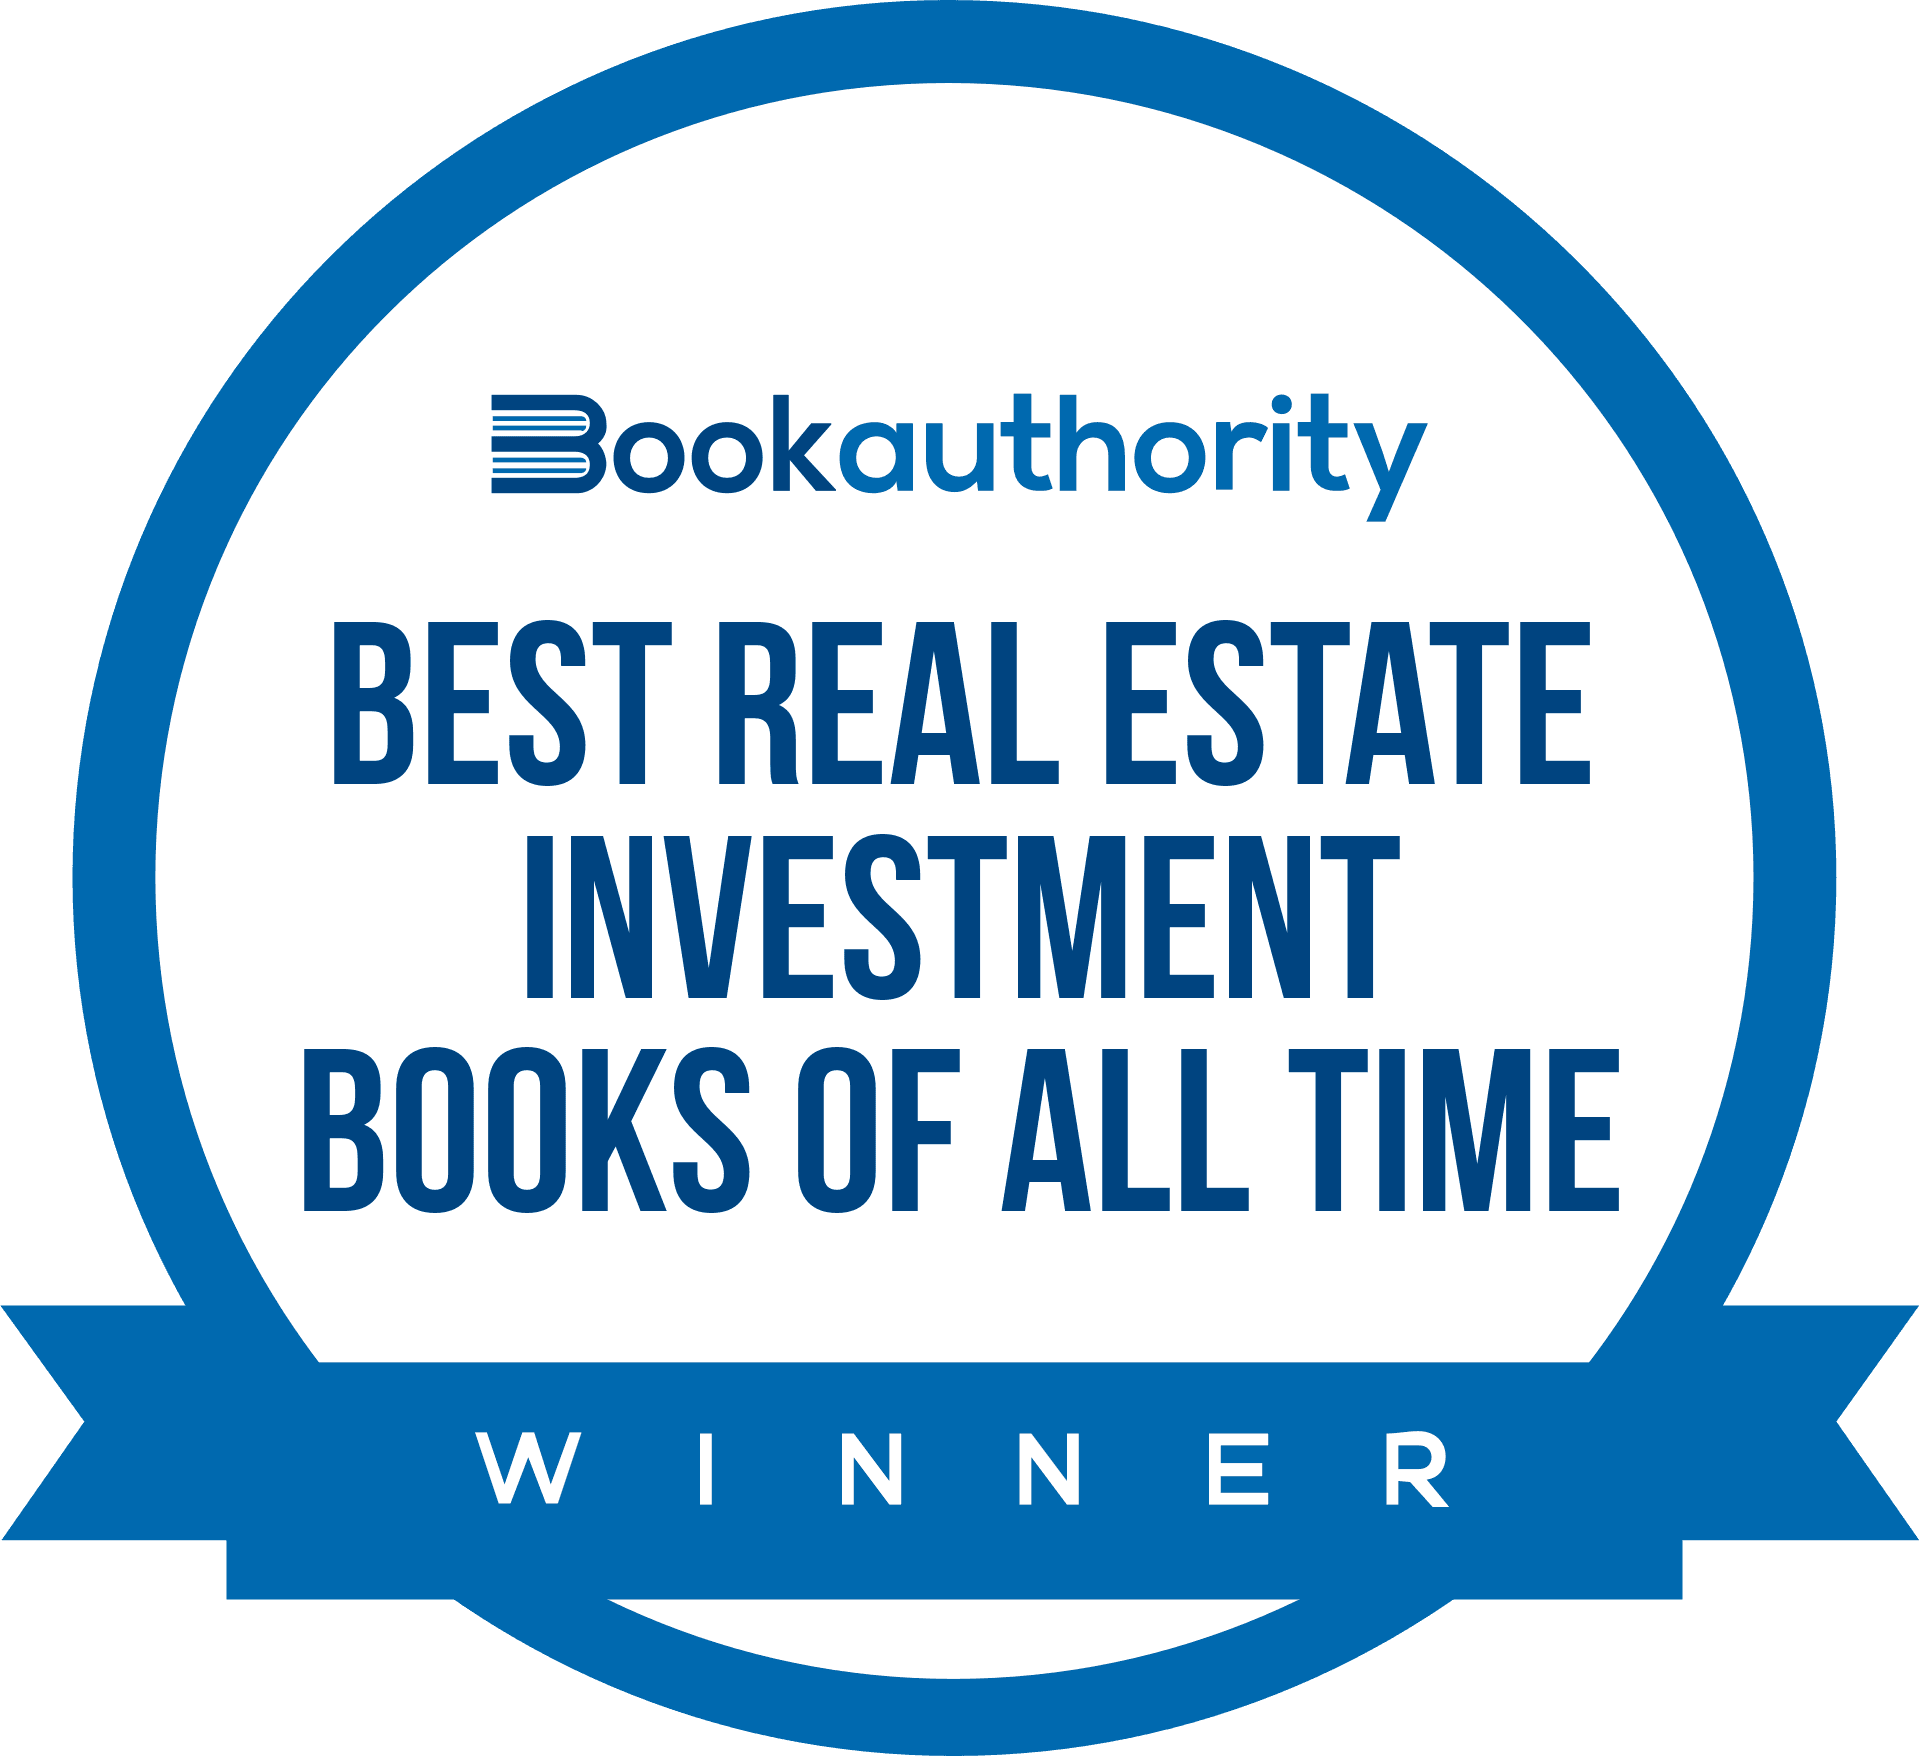 "Best Real Estate Investment Books Of All Time" - Book Authority